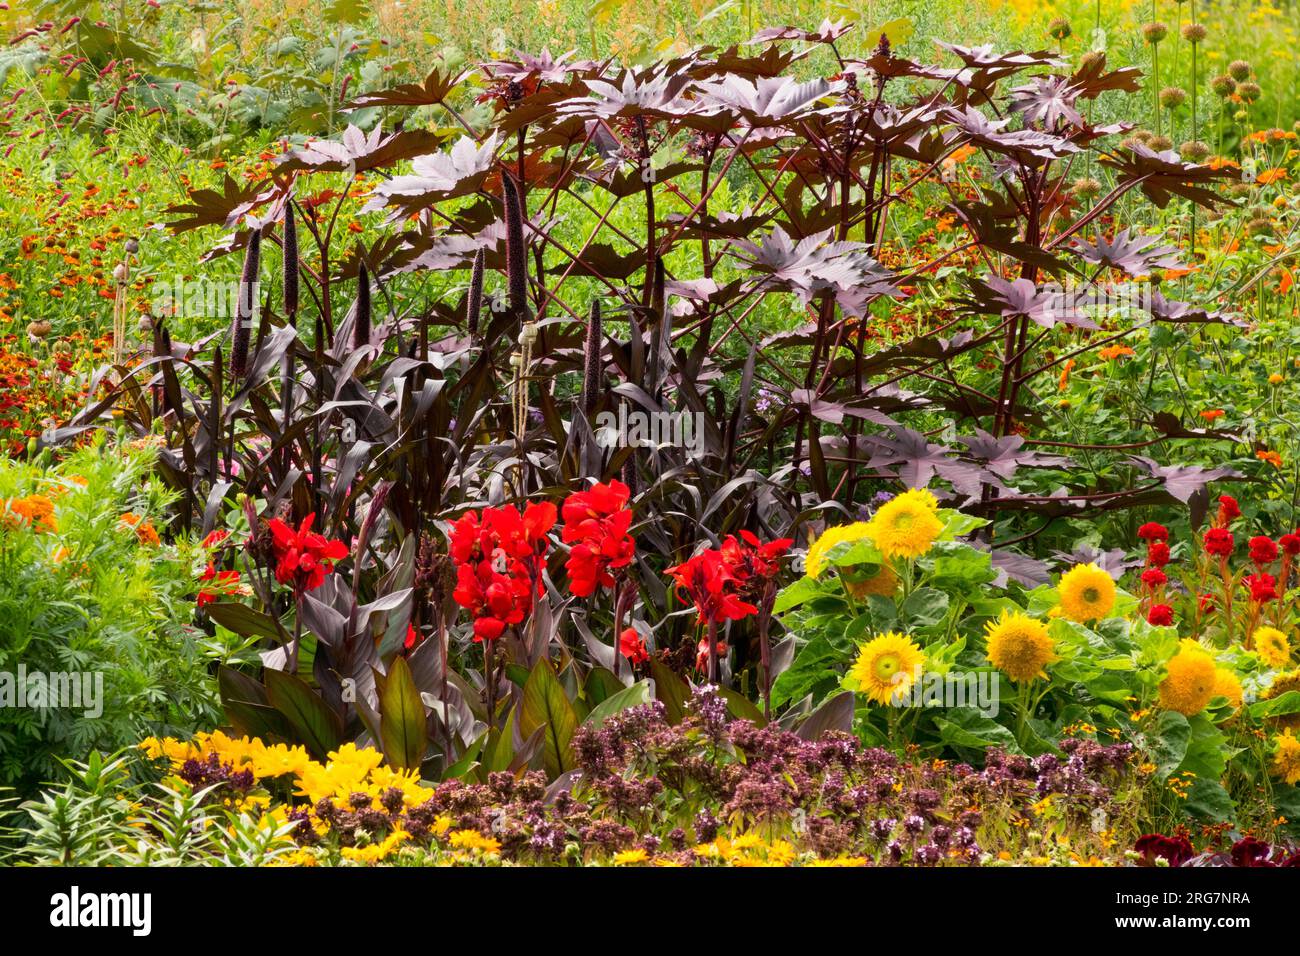 Colourful flowers garden border annuals and perennials plants Yellow, Purple Red Canna Sunflowers Castor oil plant Millet in a mid-summer garden scene Stock Photo